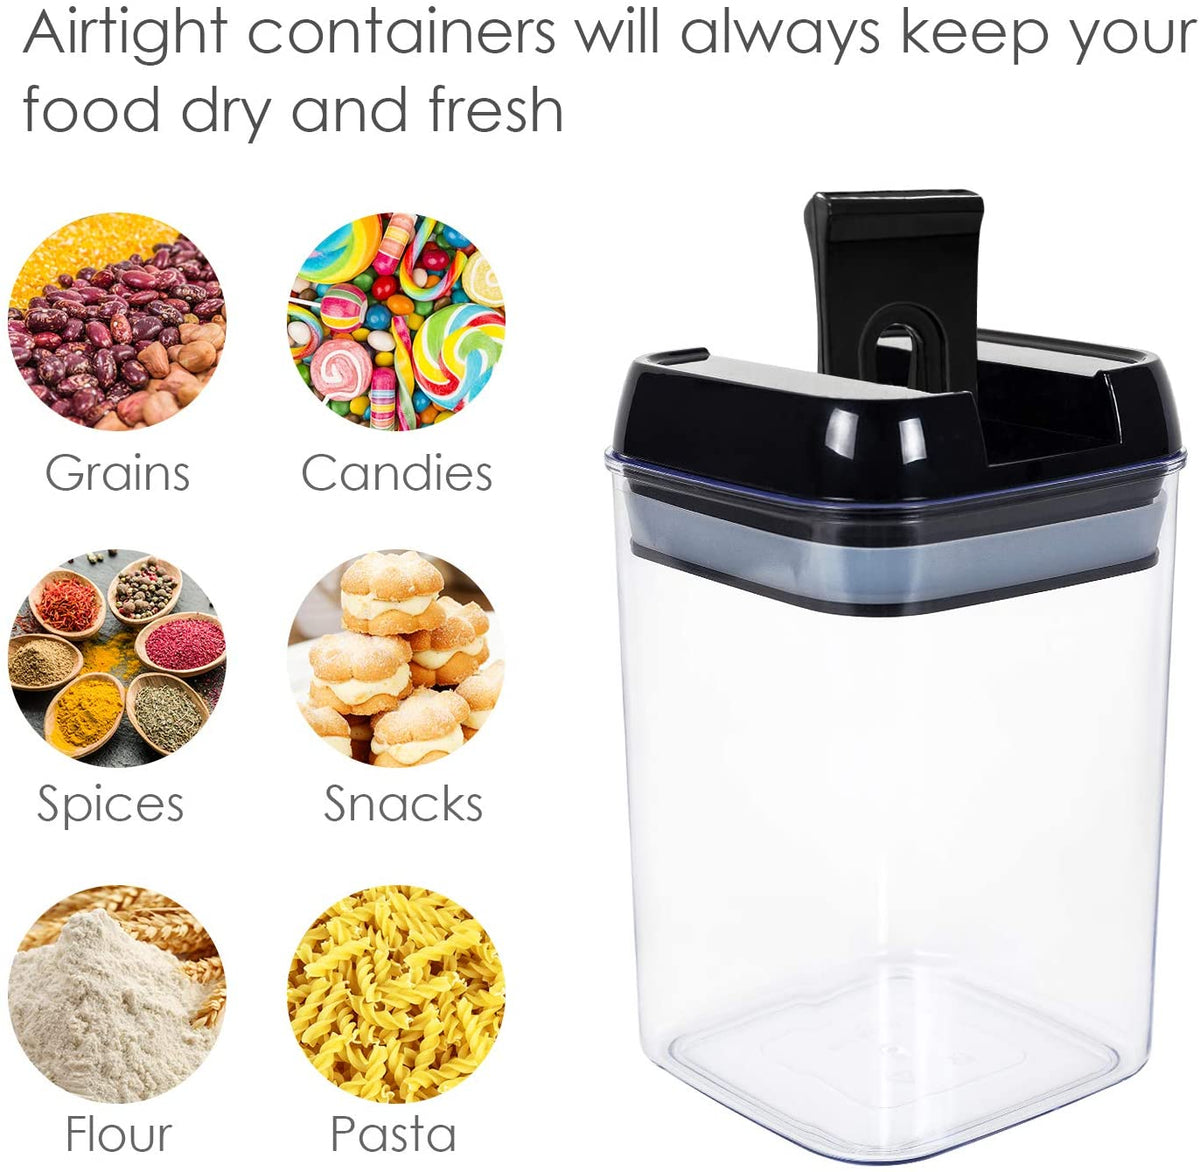 7 Pieces Air Tight Food Storage Containers – BPA Free – Ganis